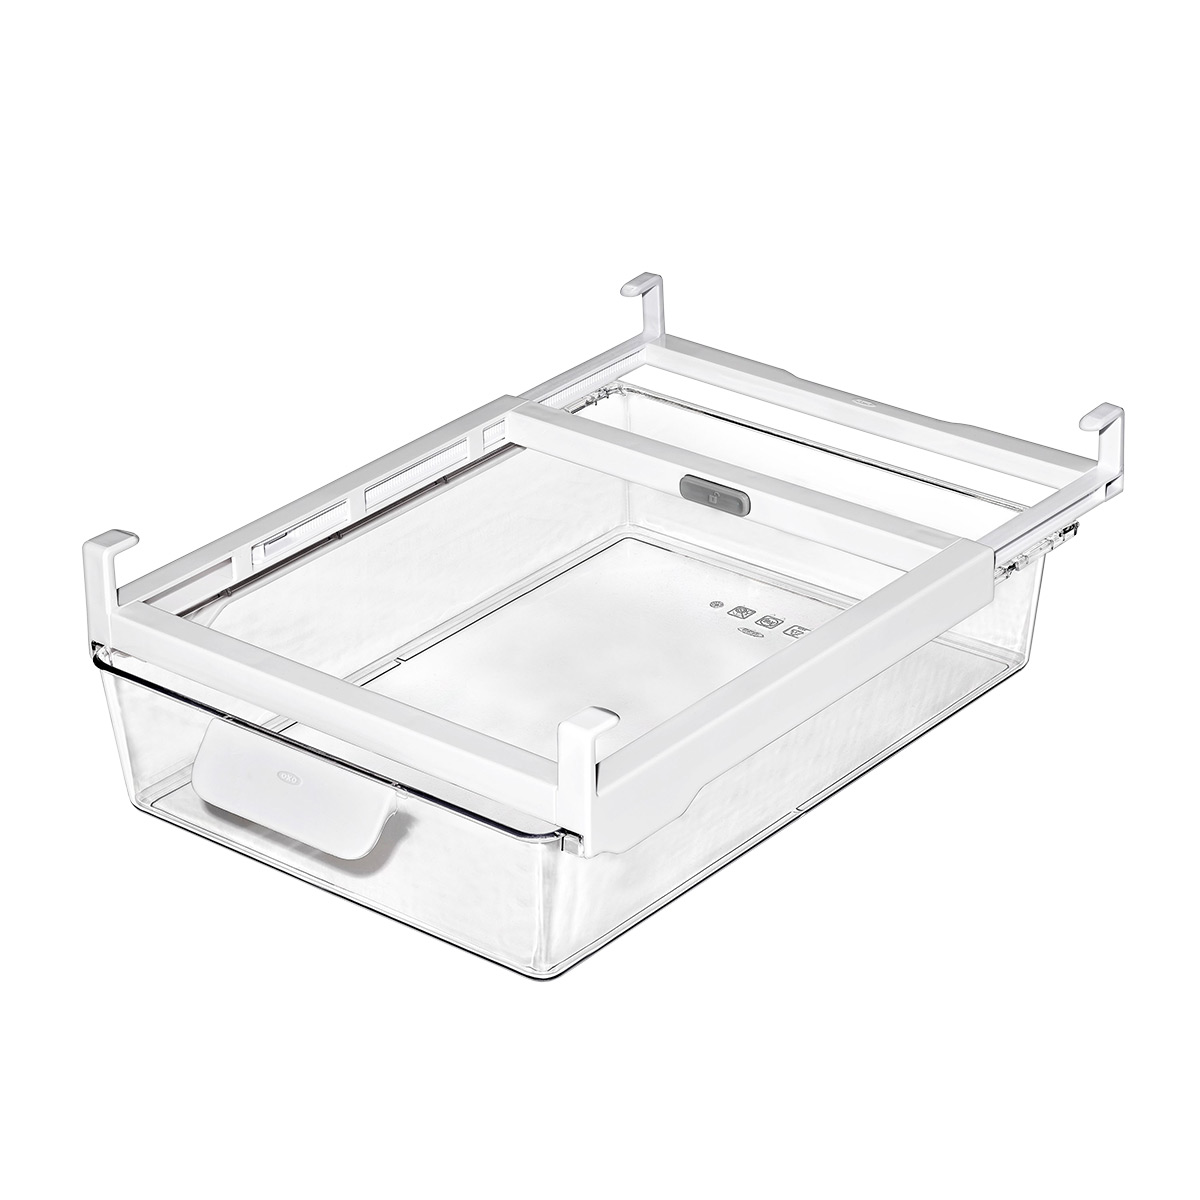 https://www.containerstore.com/catalogimages/474005/10092334-oxo-14in-undershelf-drawer-.jpg